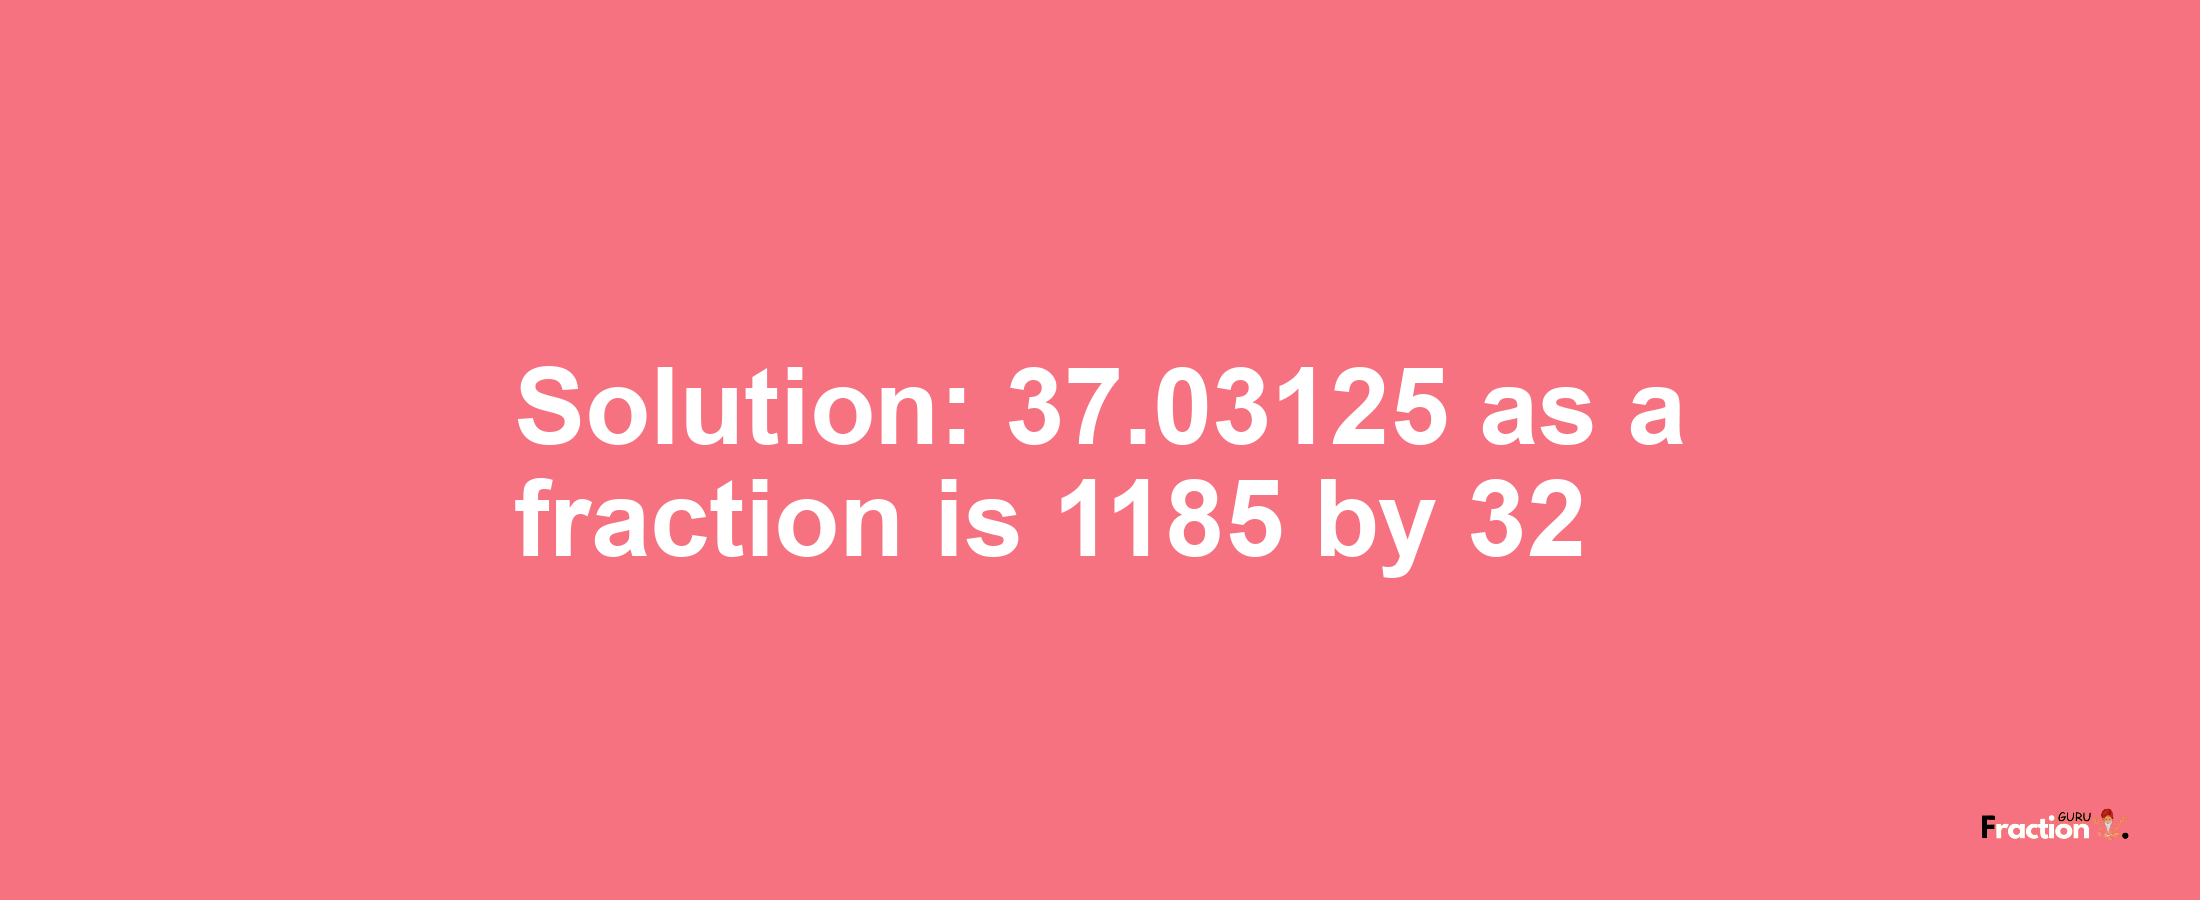 Solution:37.03125 as a fraction is 1185/32